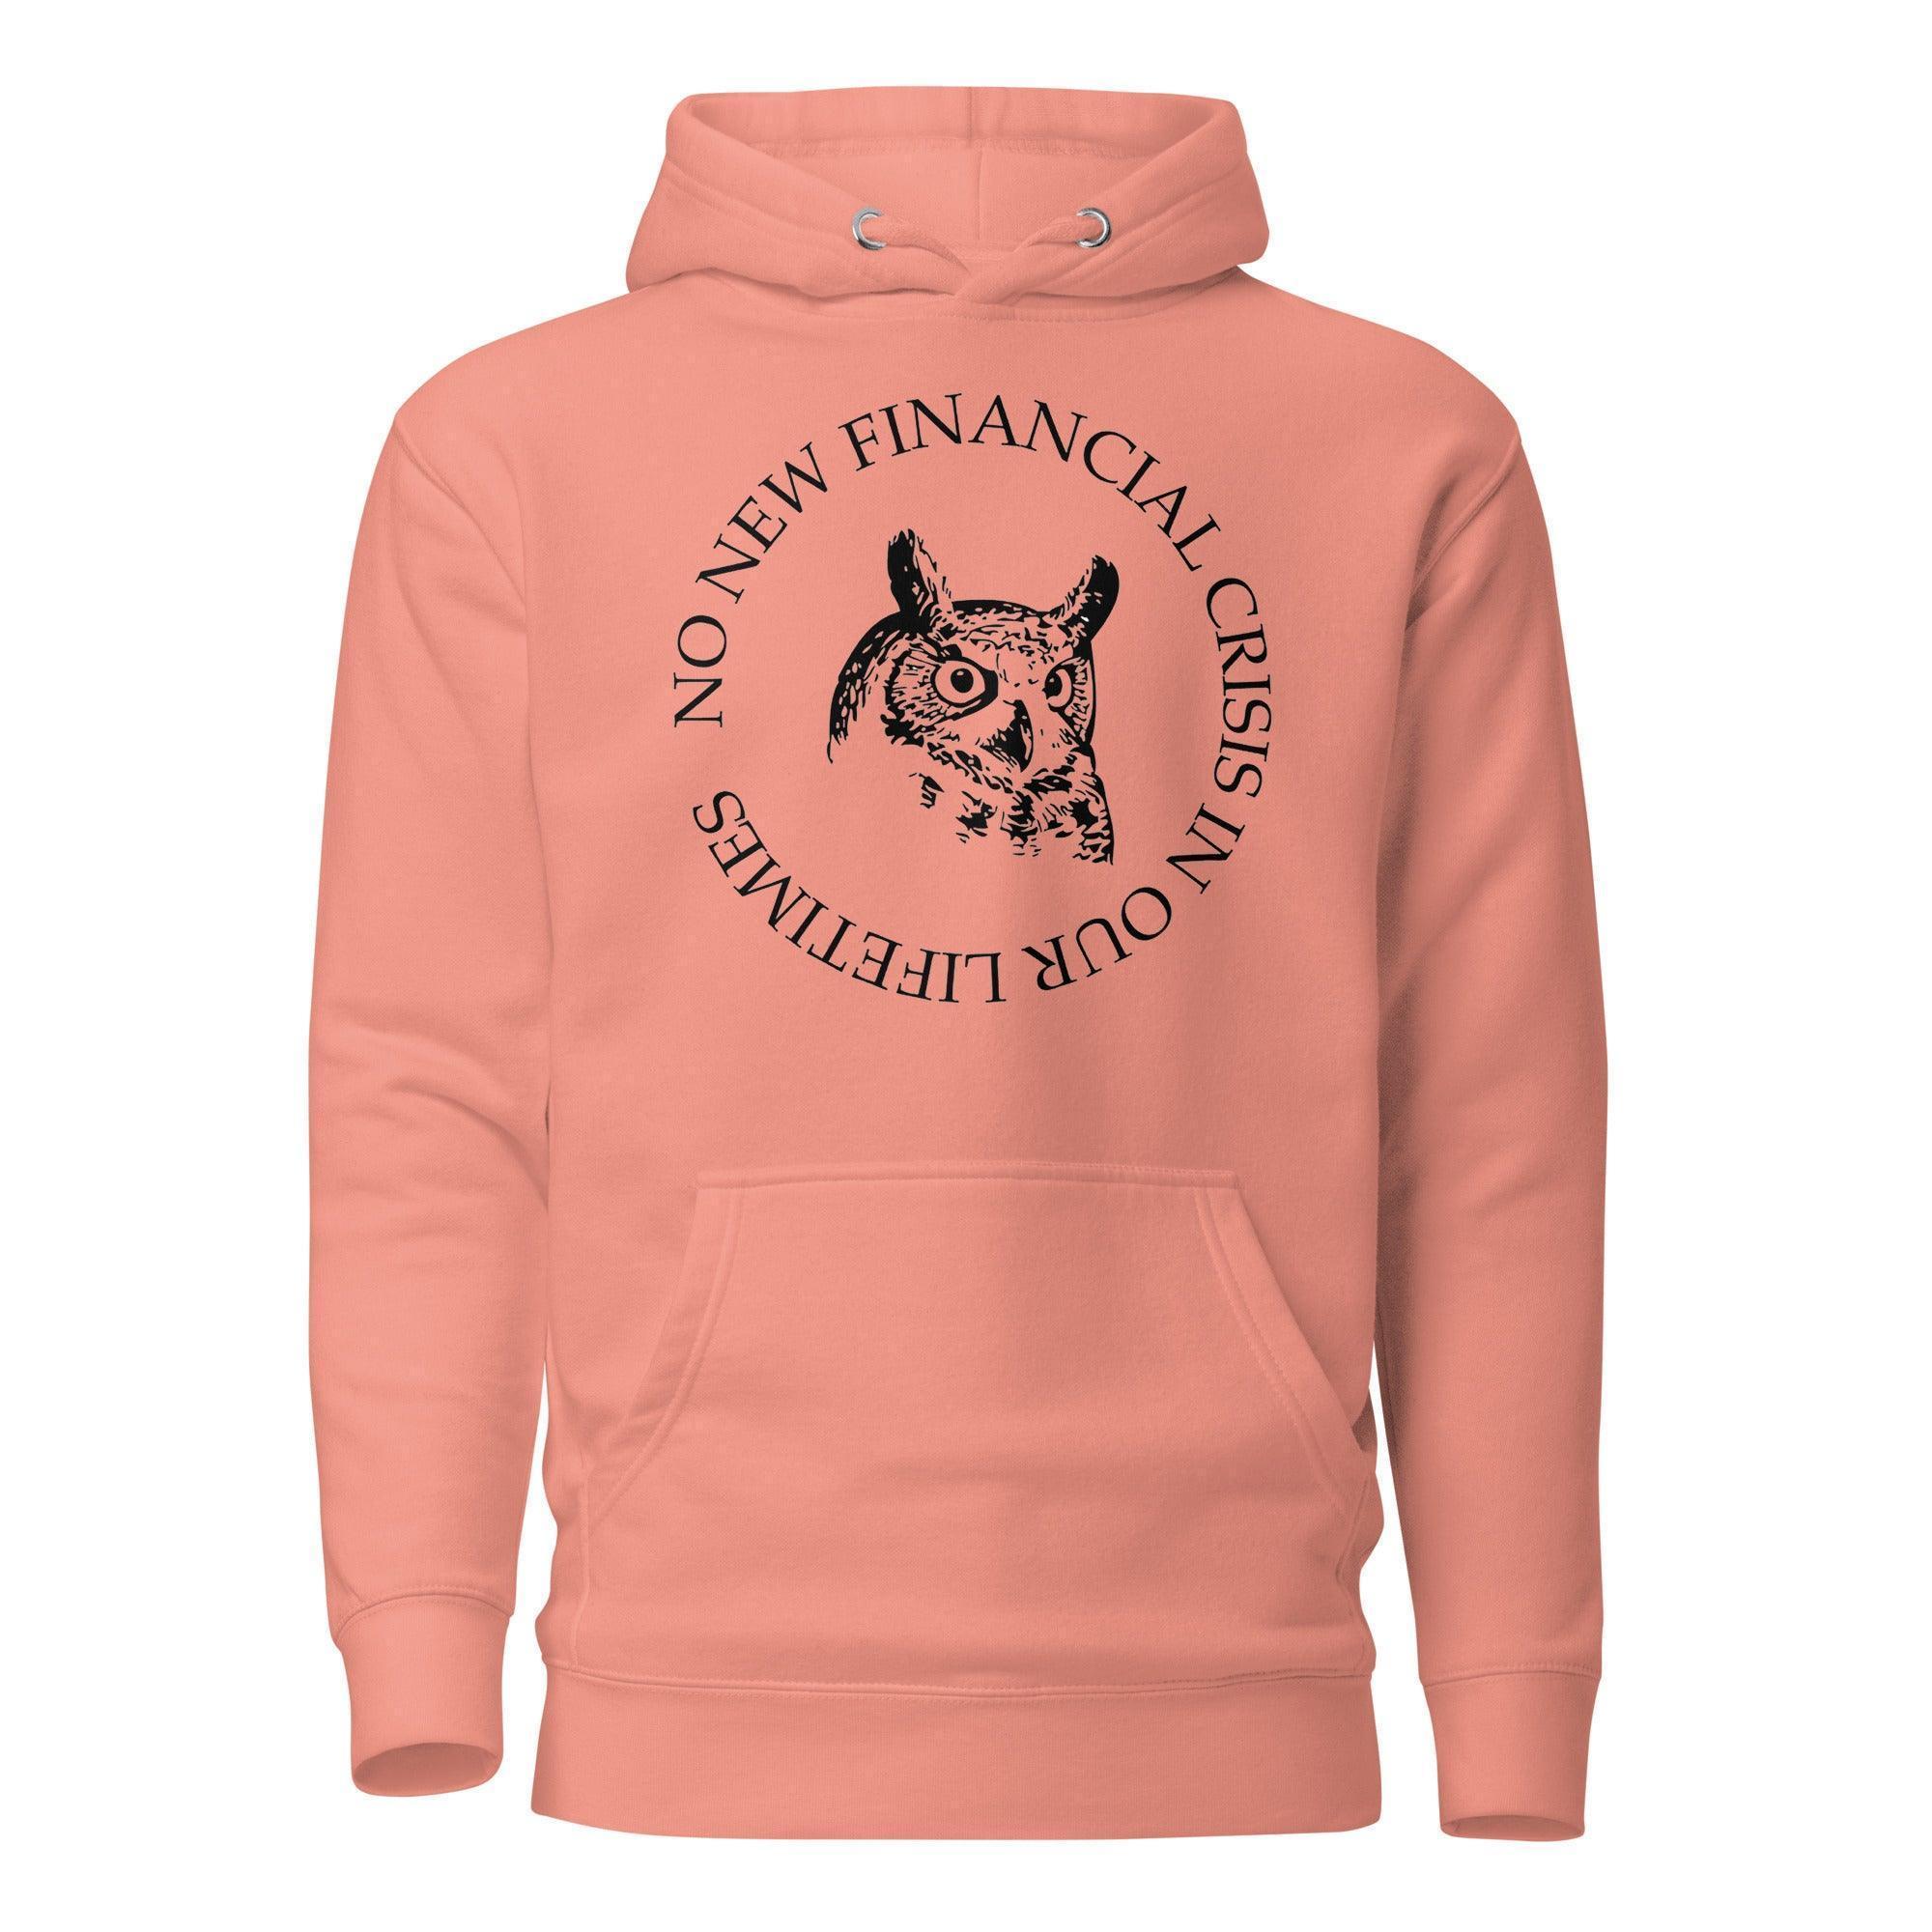 Financial Crisis Pullover Hoodie - InvestmenTees